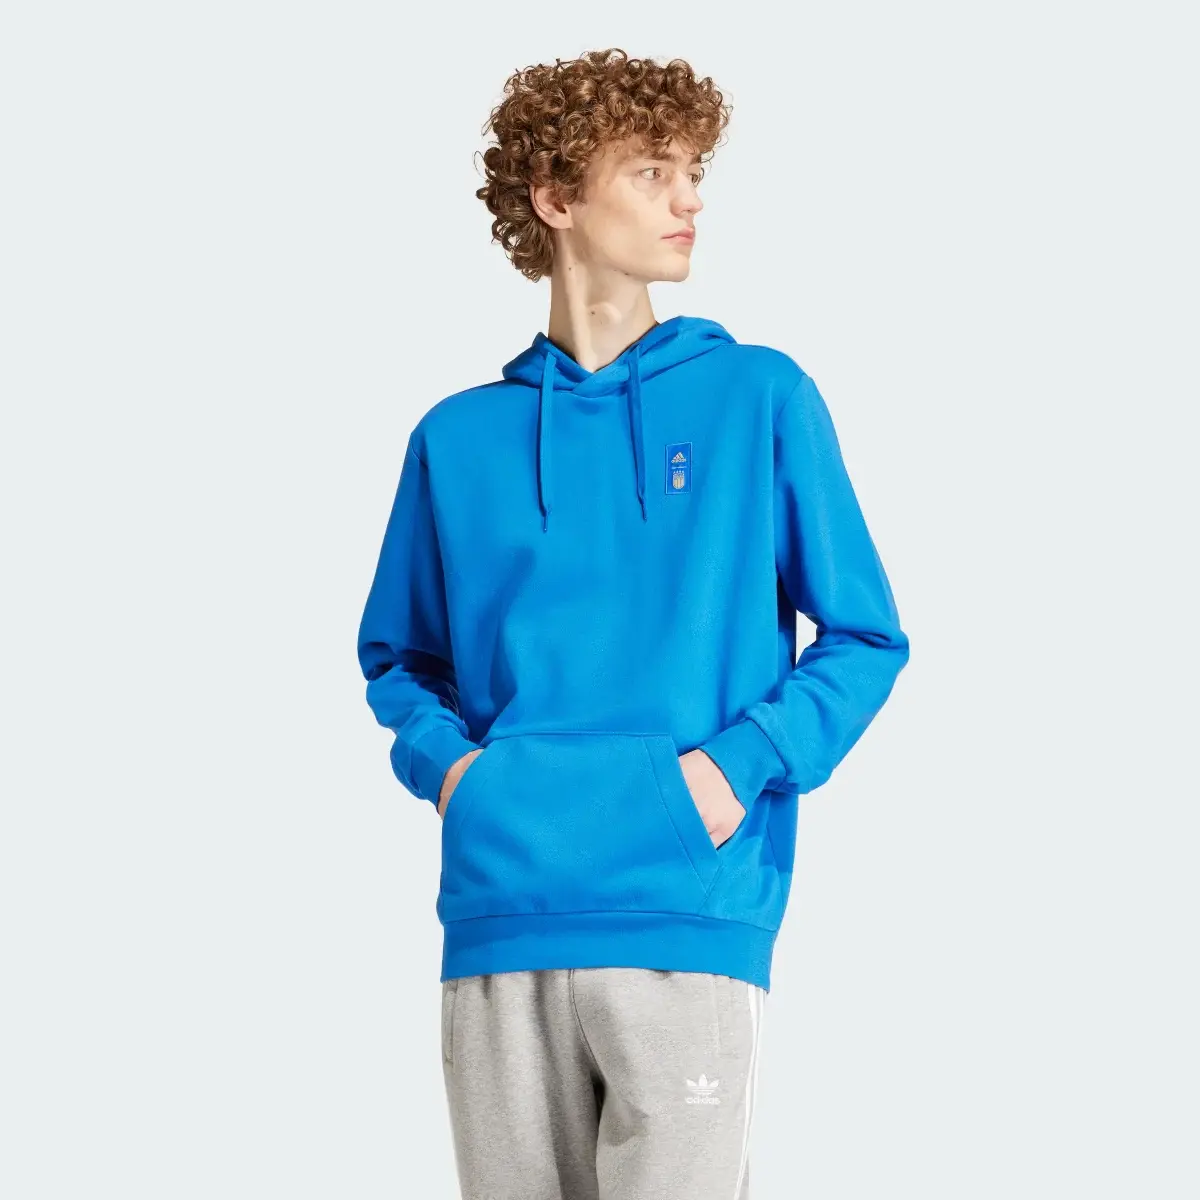 Adidas Italy DNA Hoodie. 2